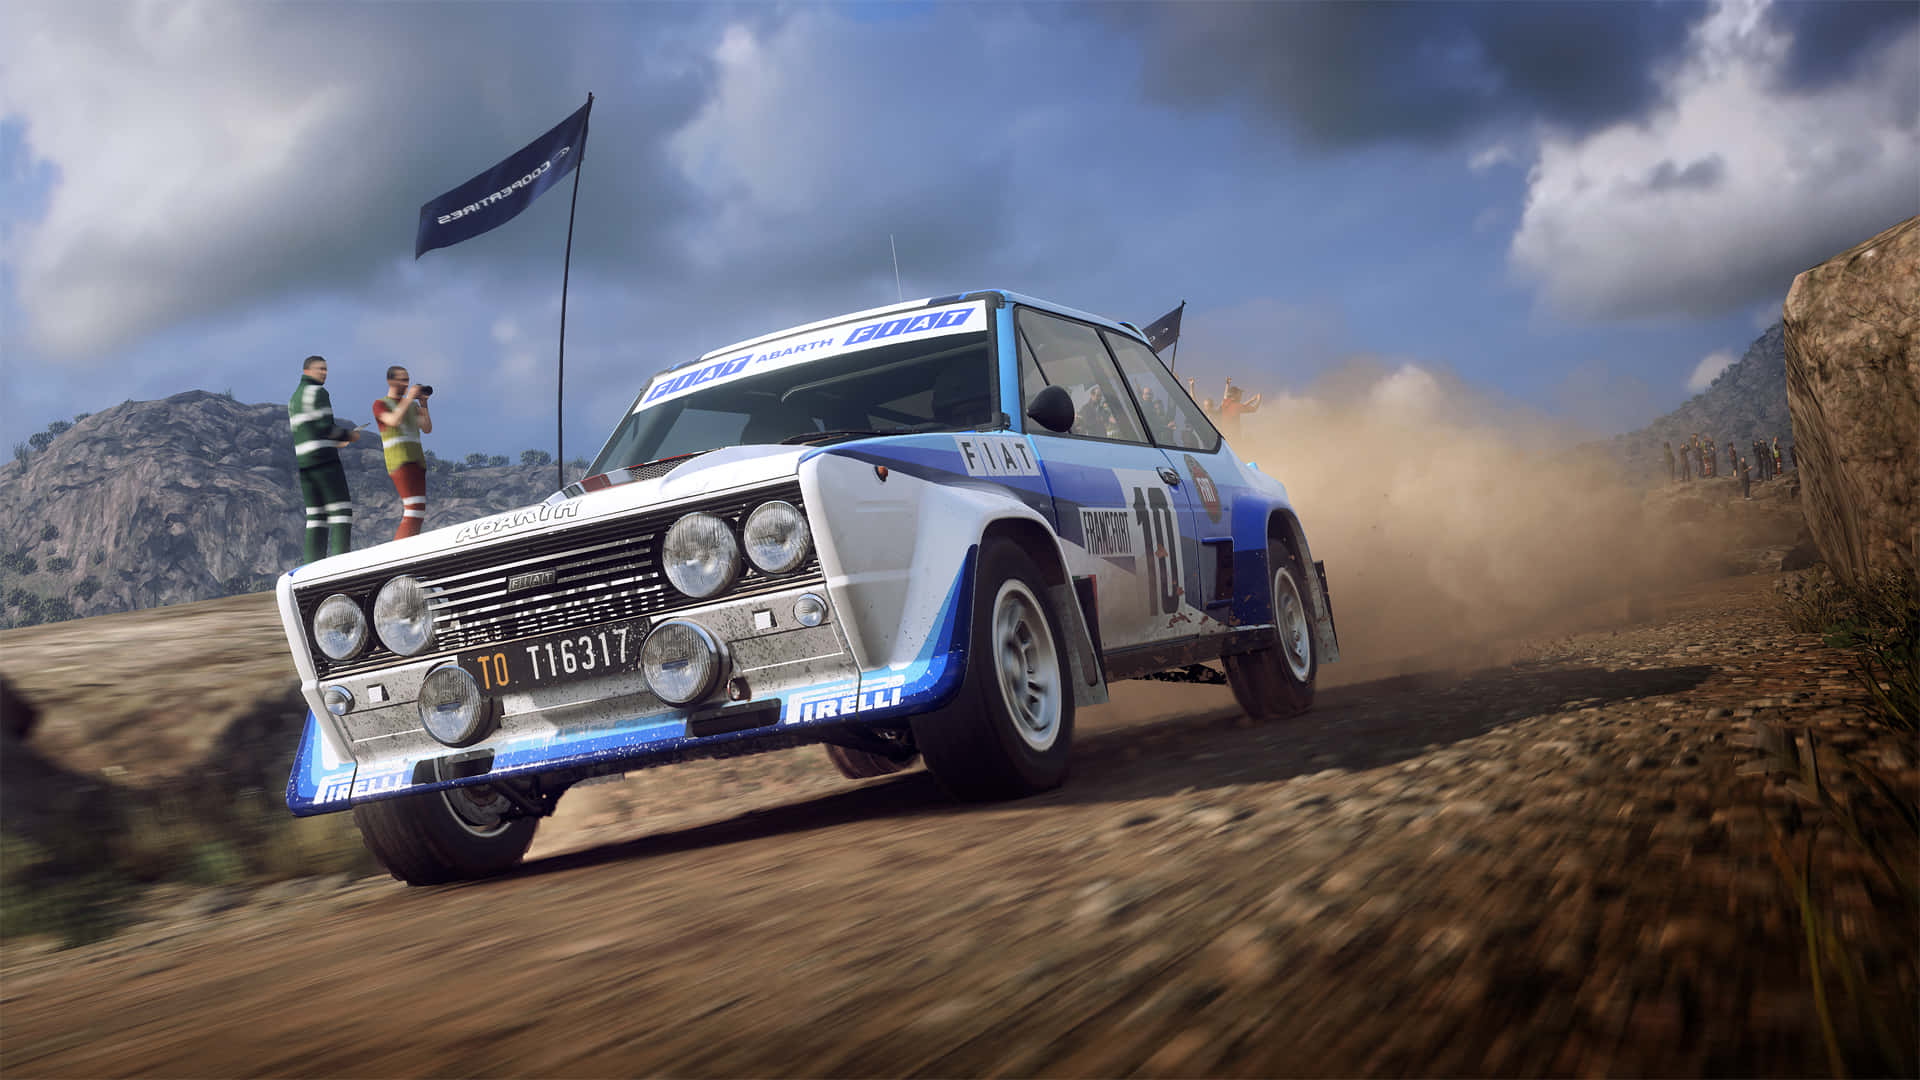 A Captivating Side View of an Intense Dirt Rally